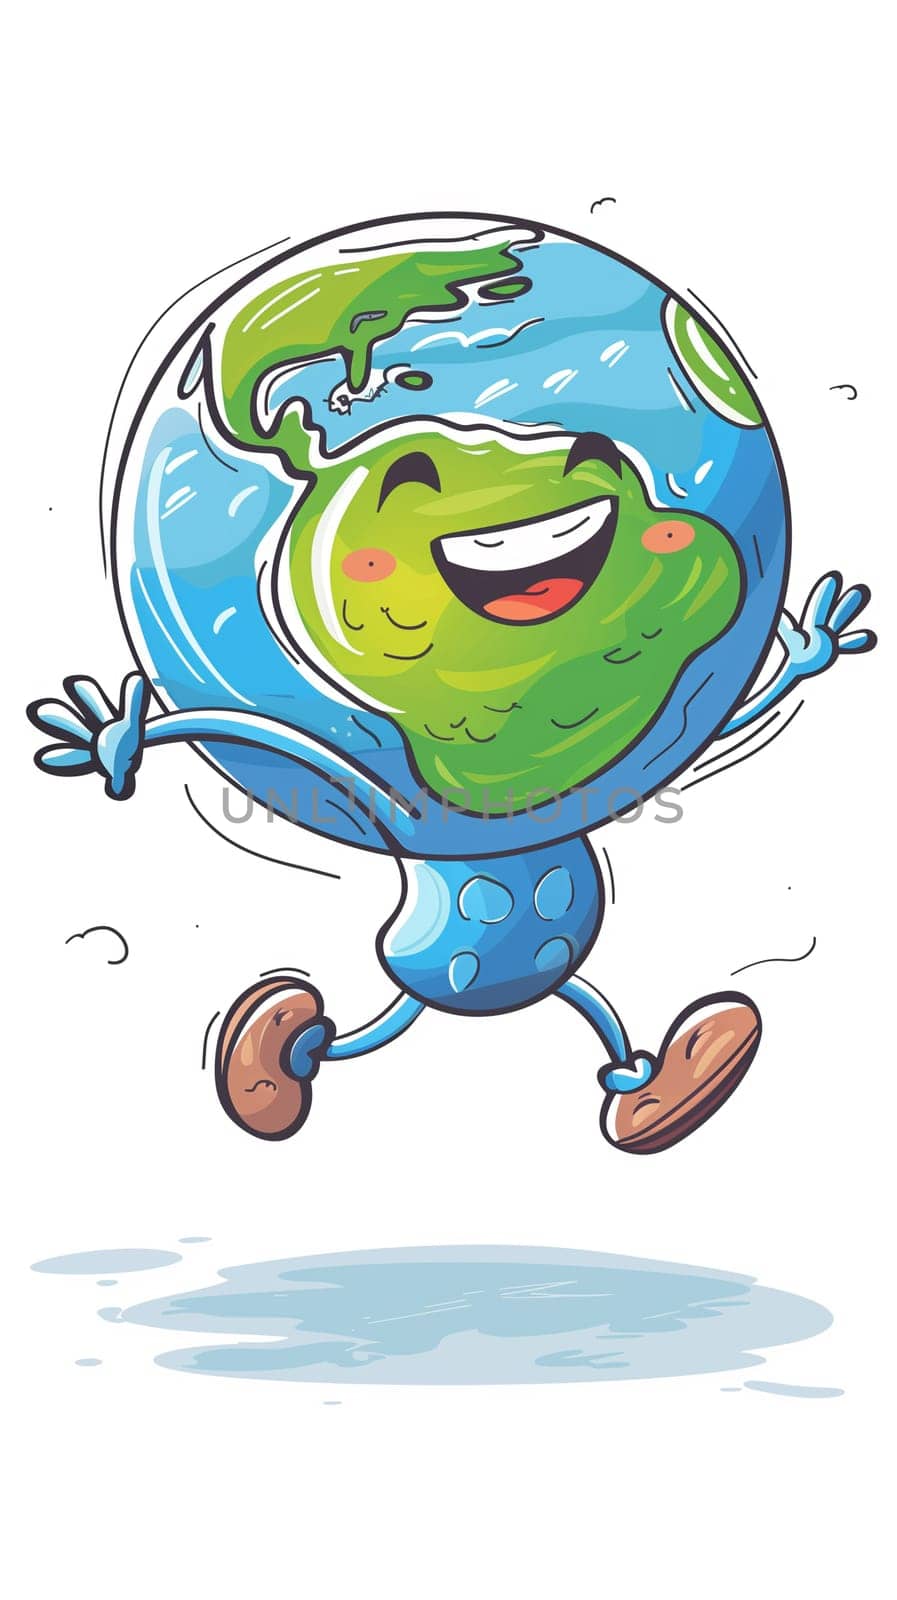 A cartoon earth character is running happily with a big smile on their face.